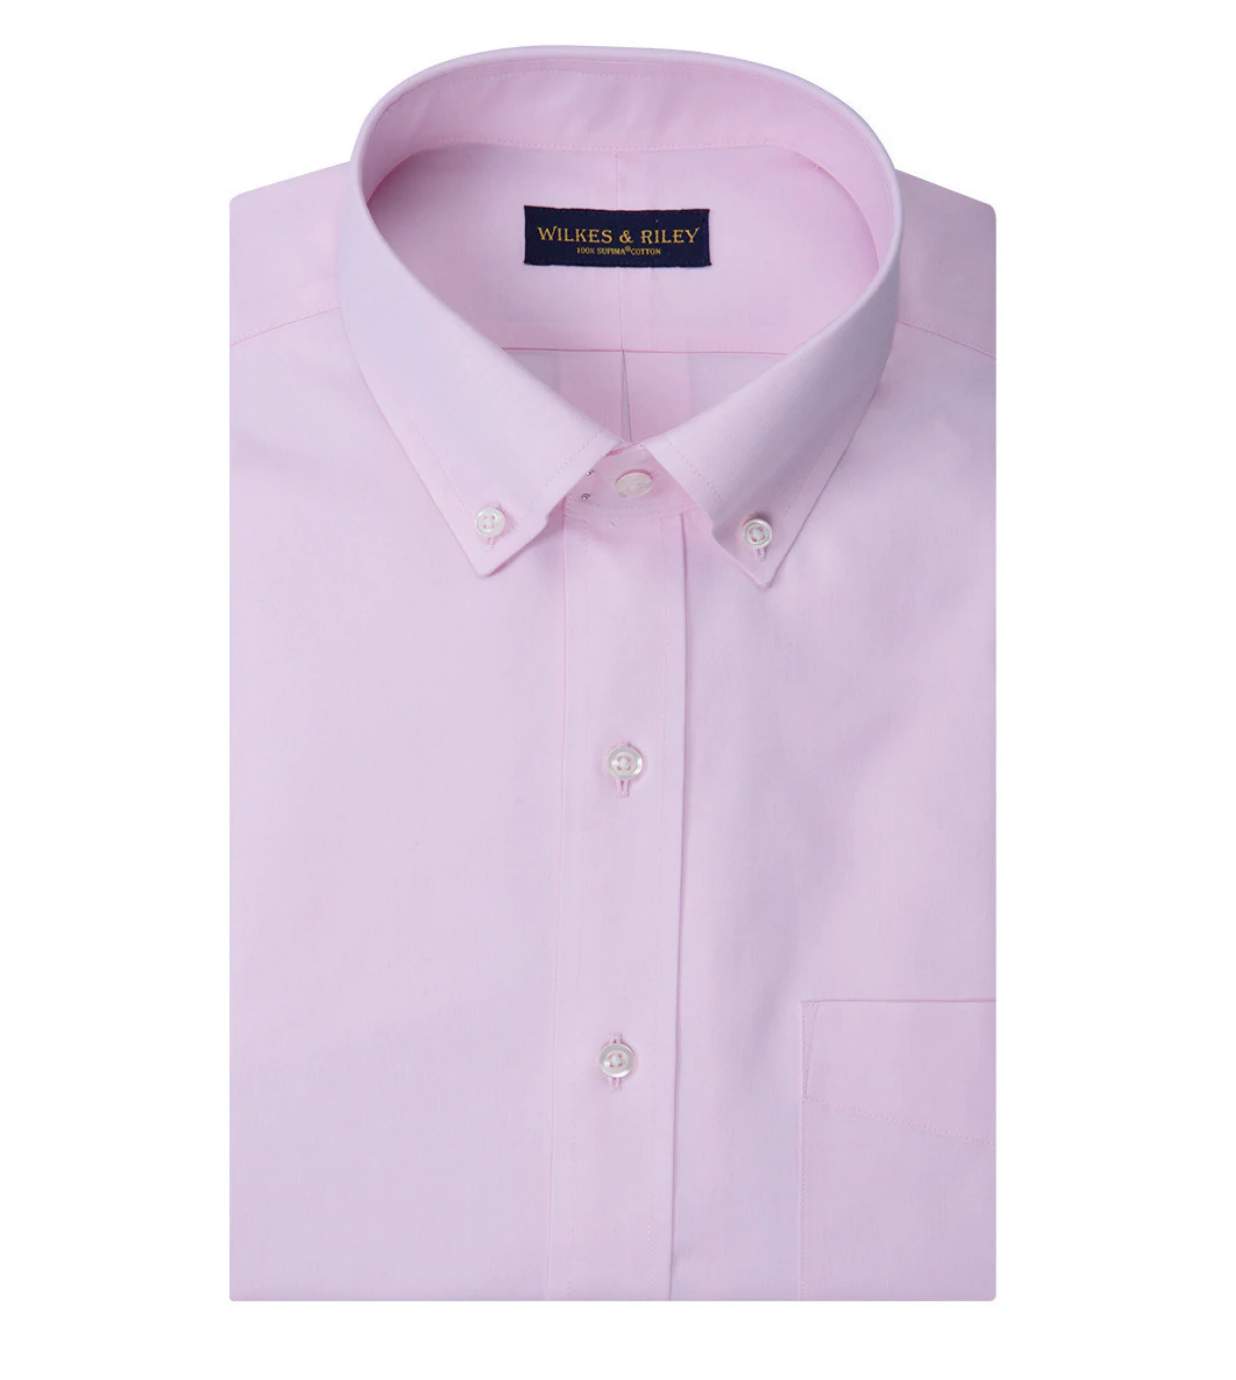 Tailored Fit Non-Iron Lavender/Navy Tattersall Button Down Sport Shirt Wilkes & Riley 